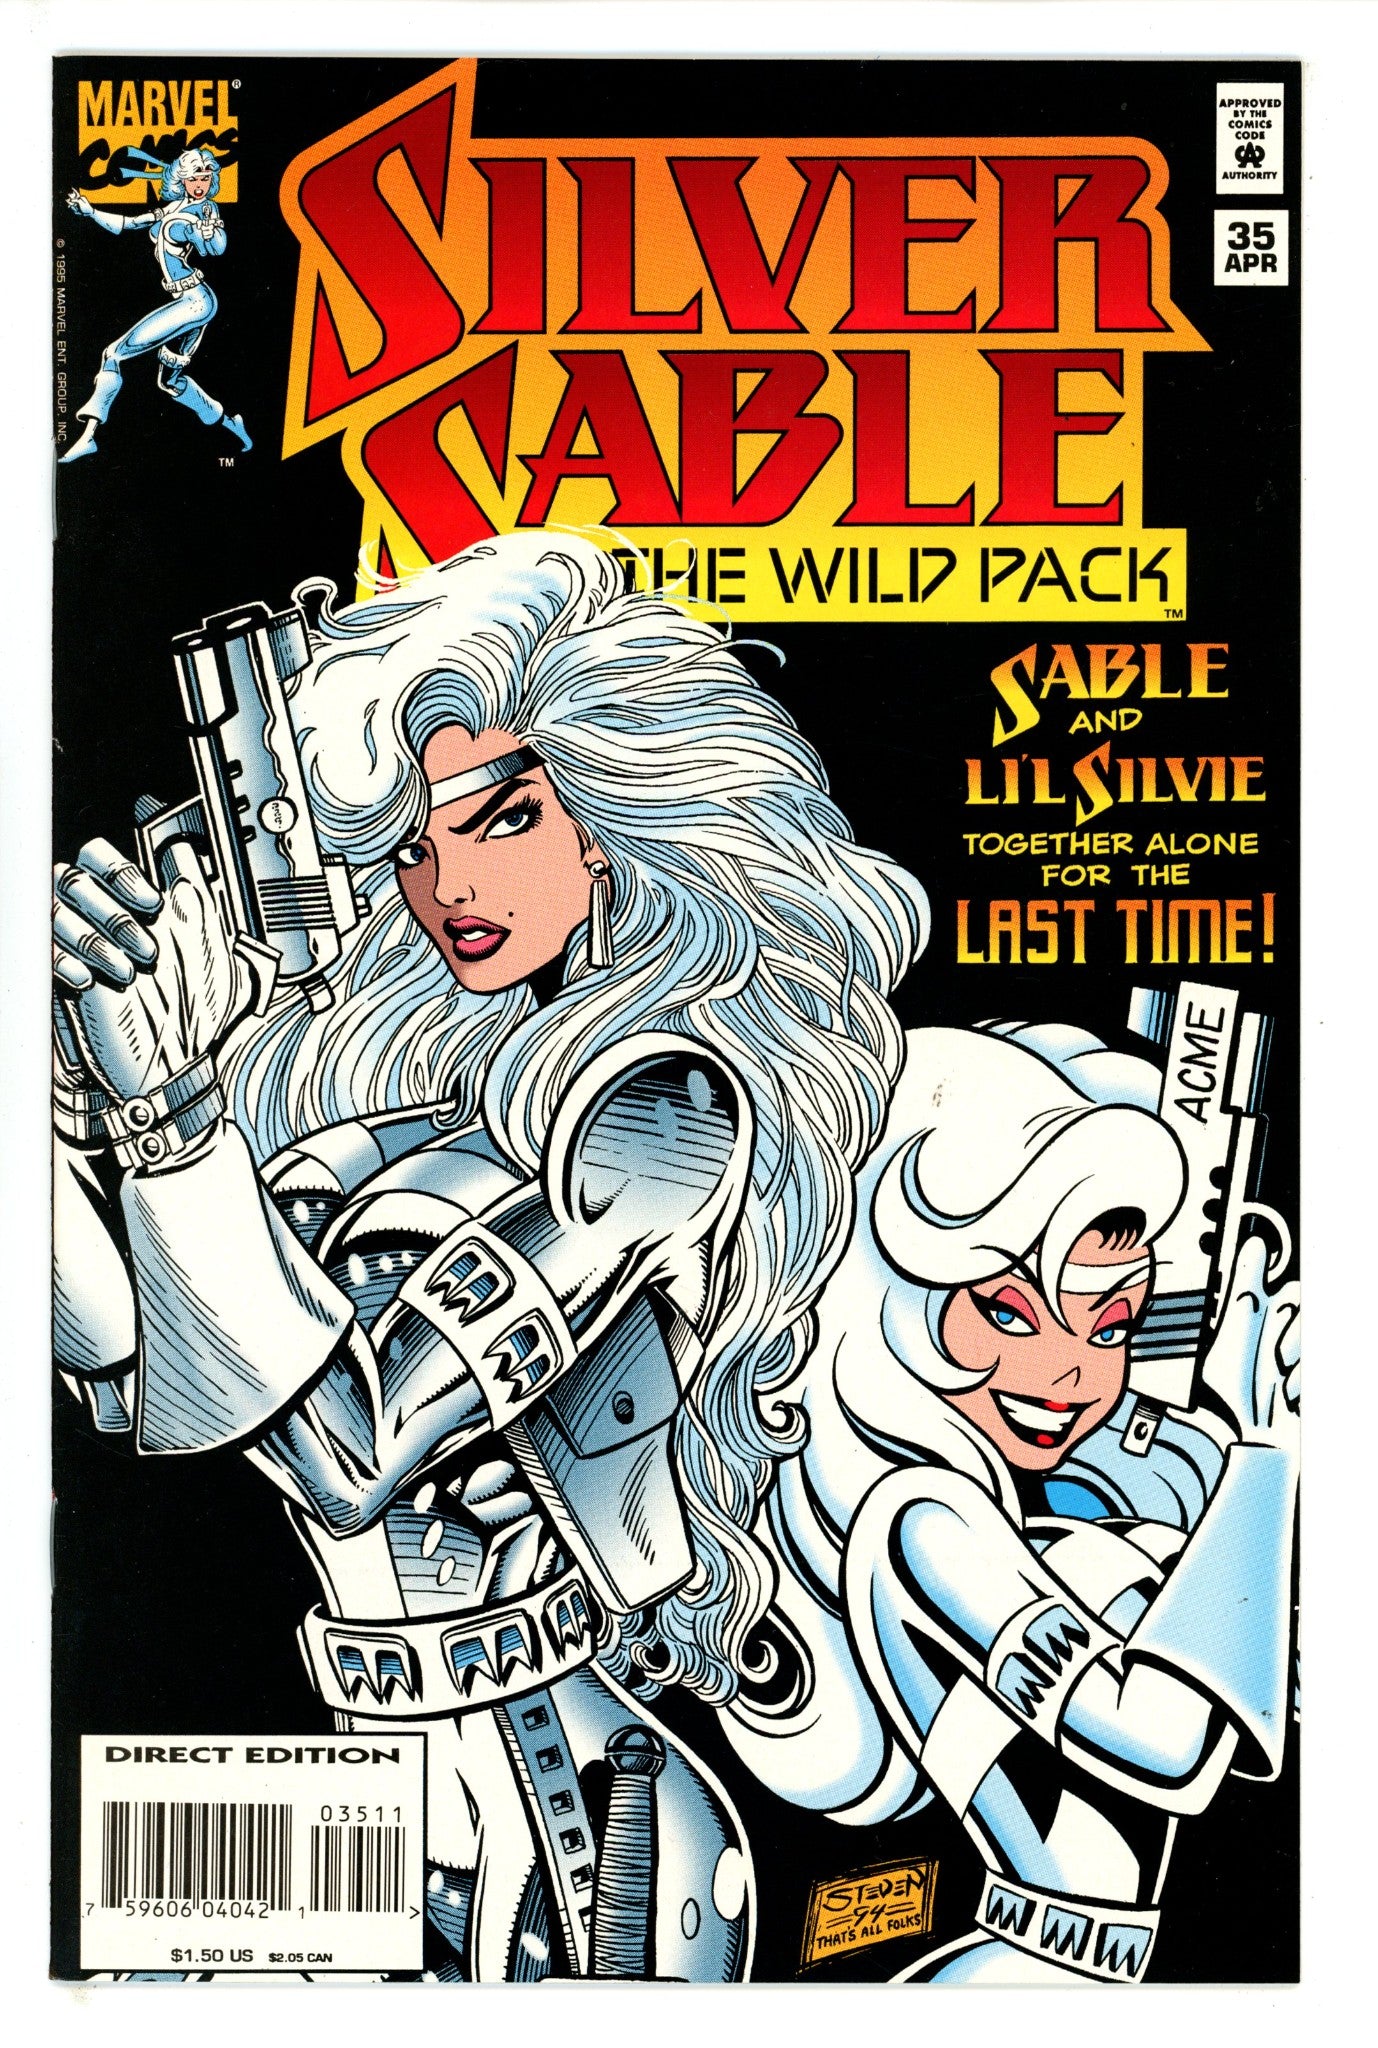 Silver Sable and the Wild Pack 35 NM- (1995)